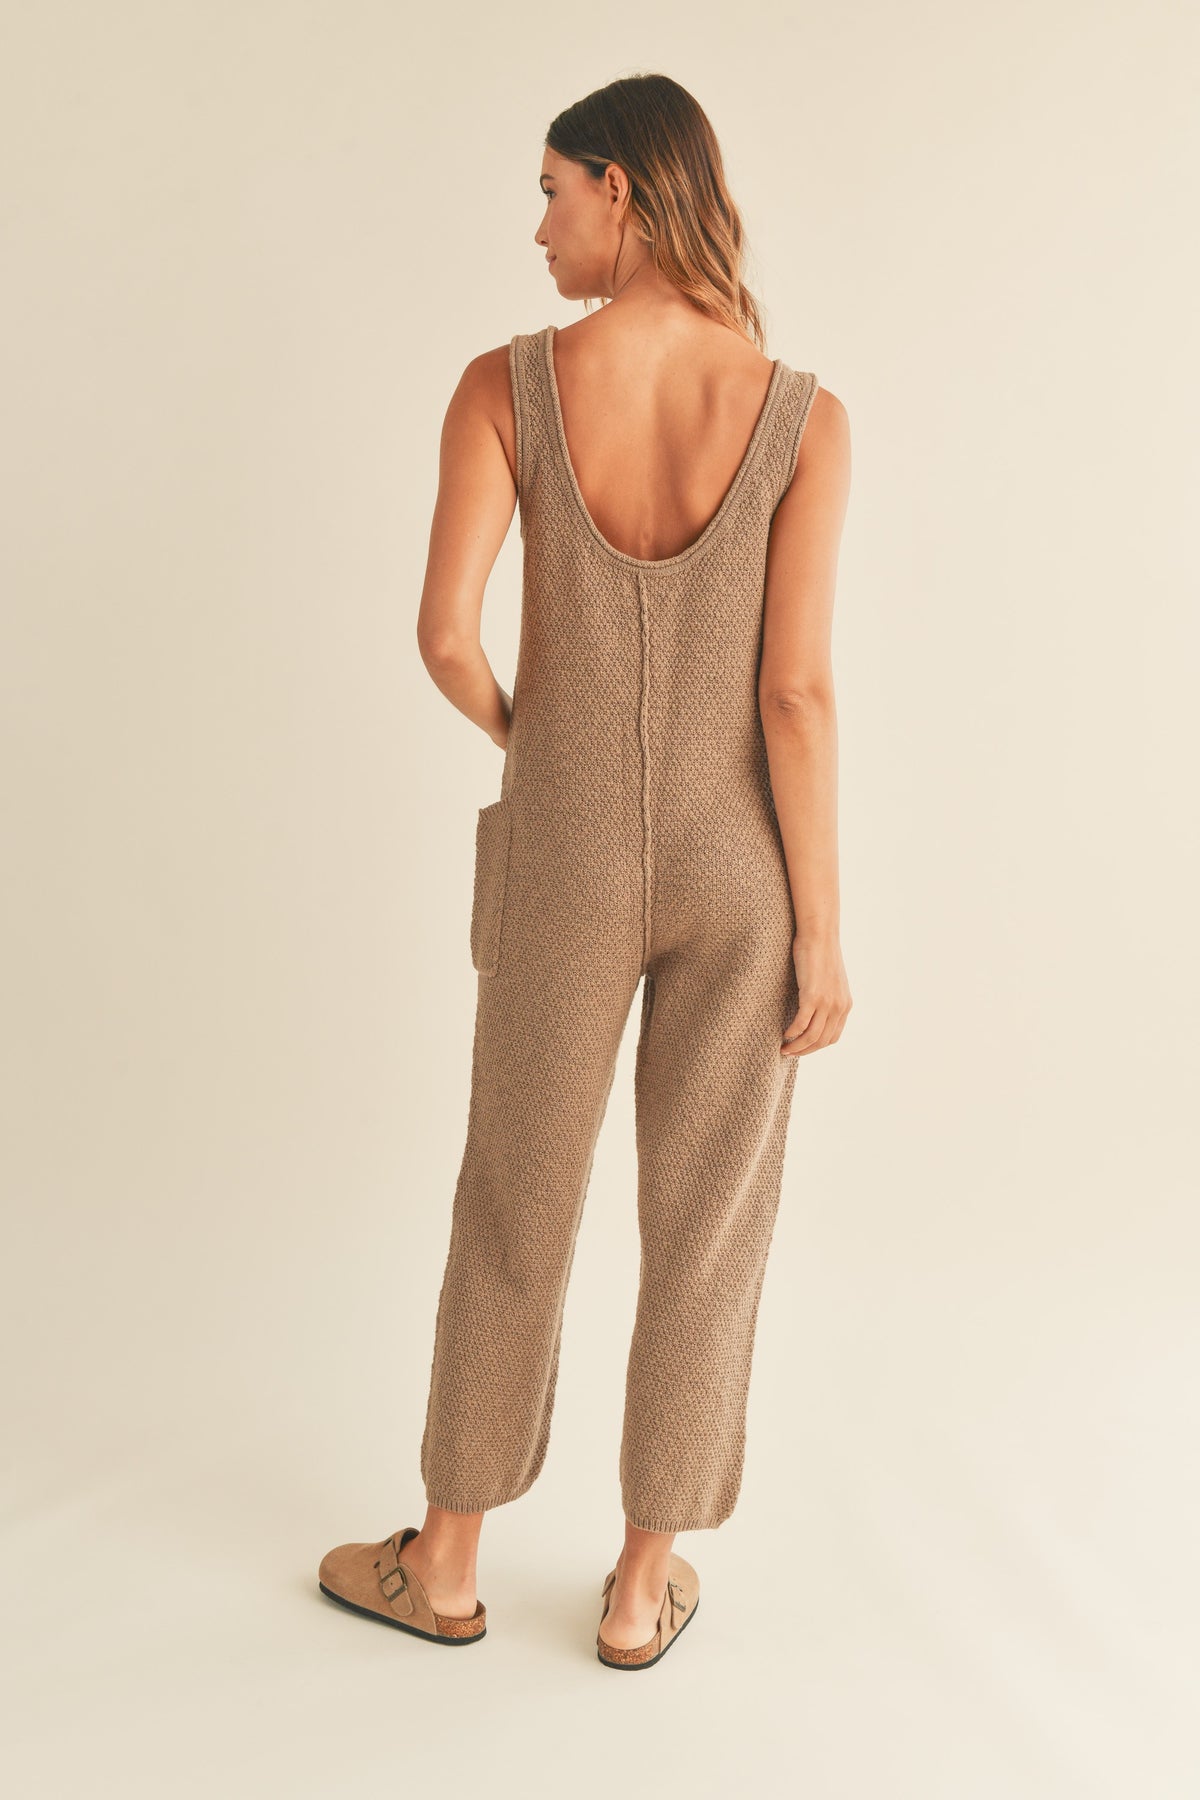 Mable | Sleeveless Knit Jumpsuit | Sweetest Stitch Online Boutique